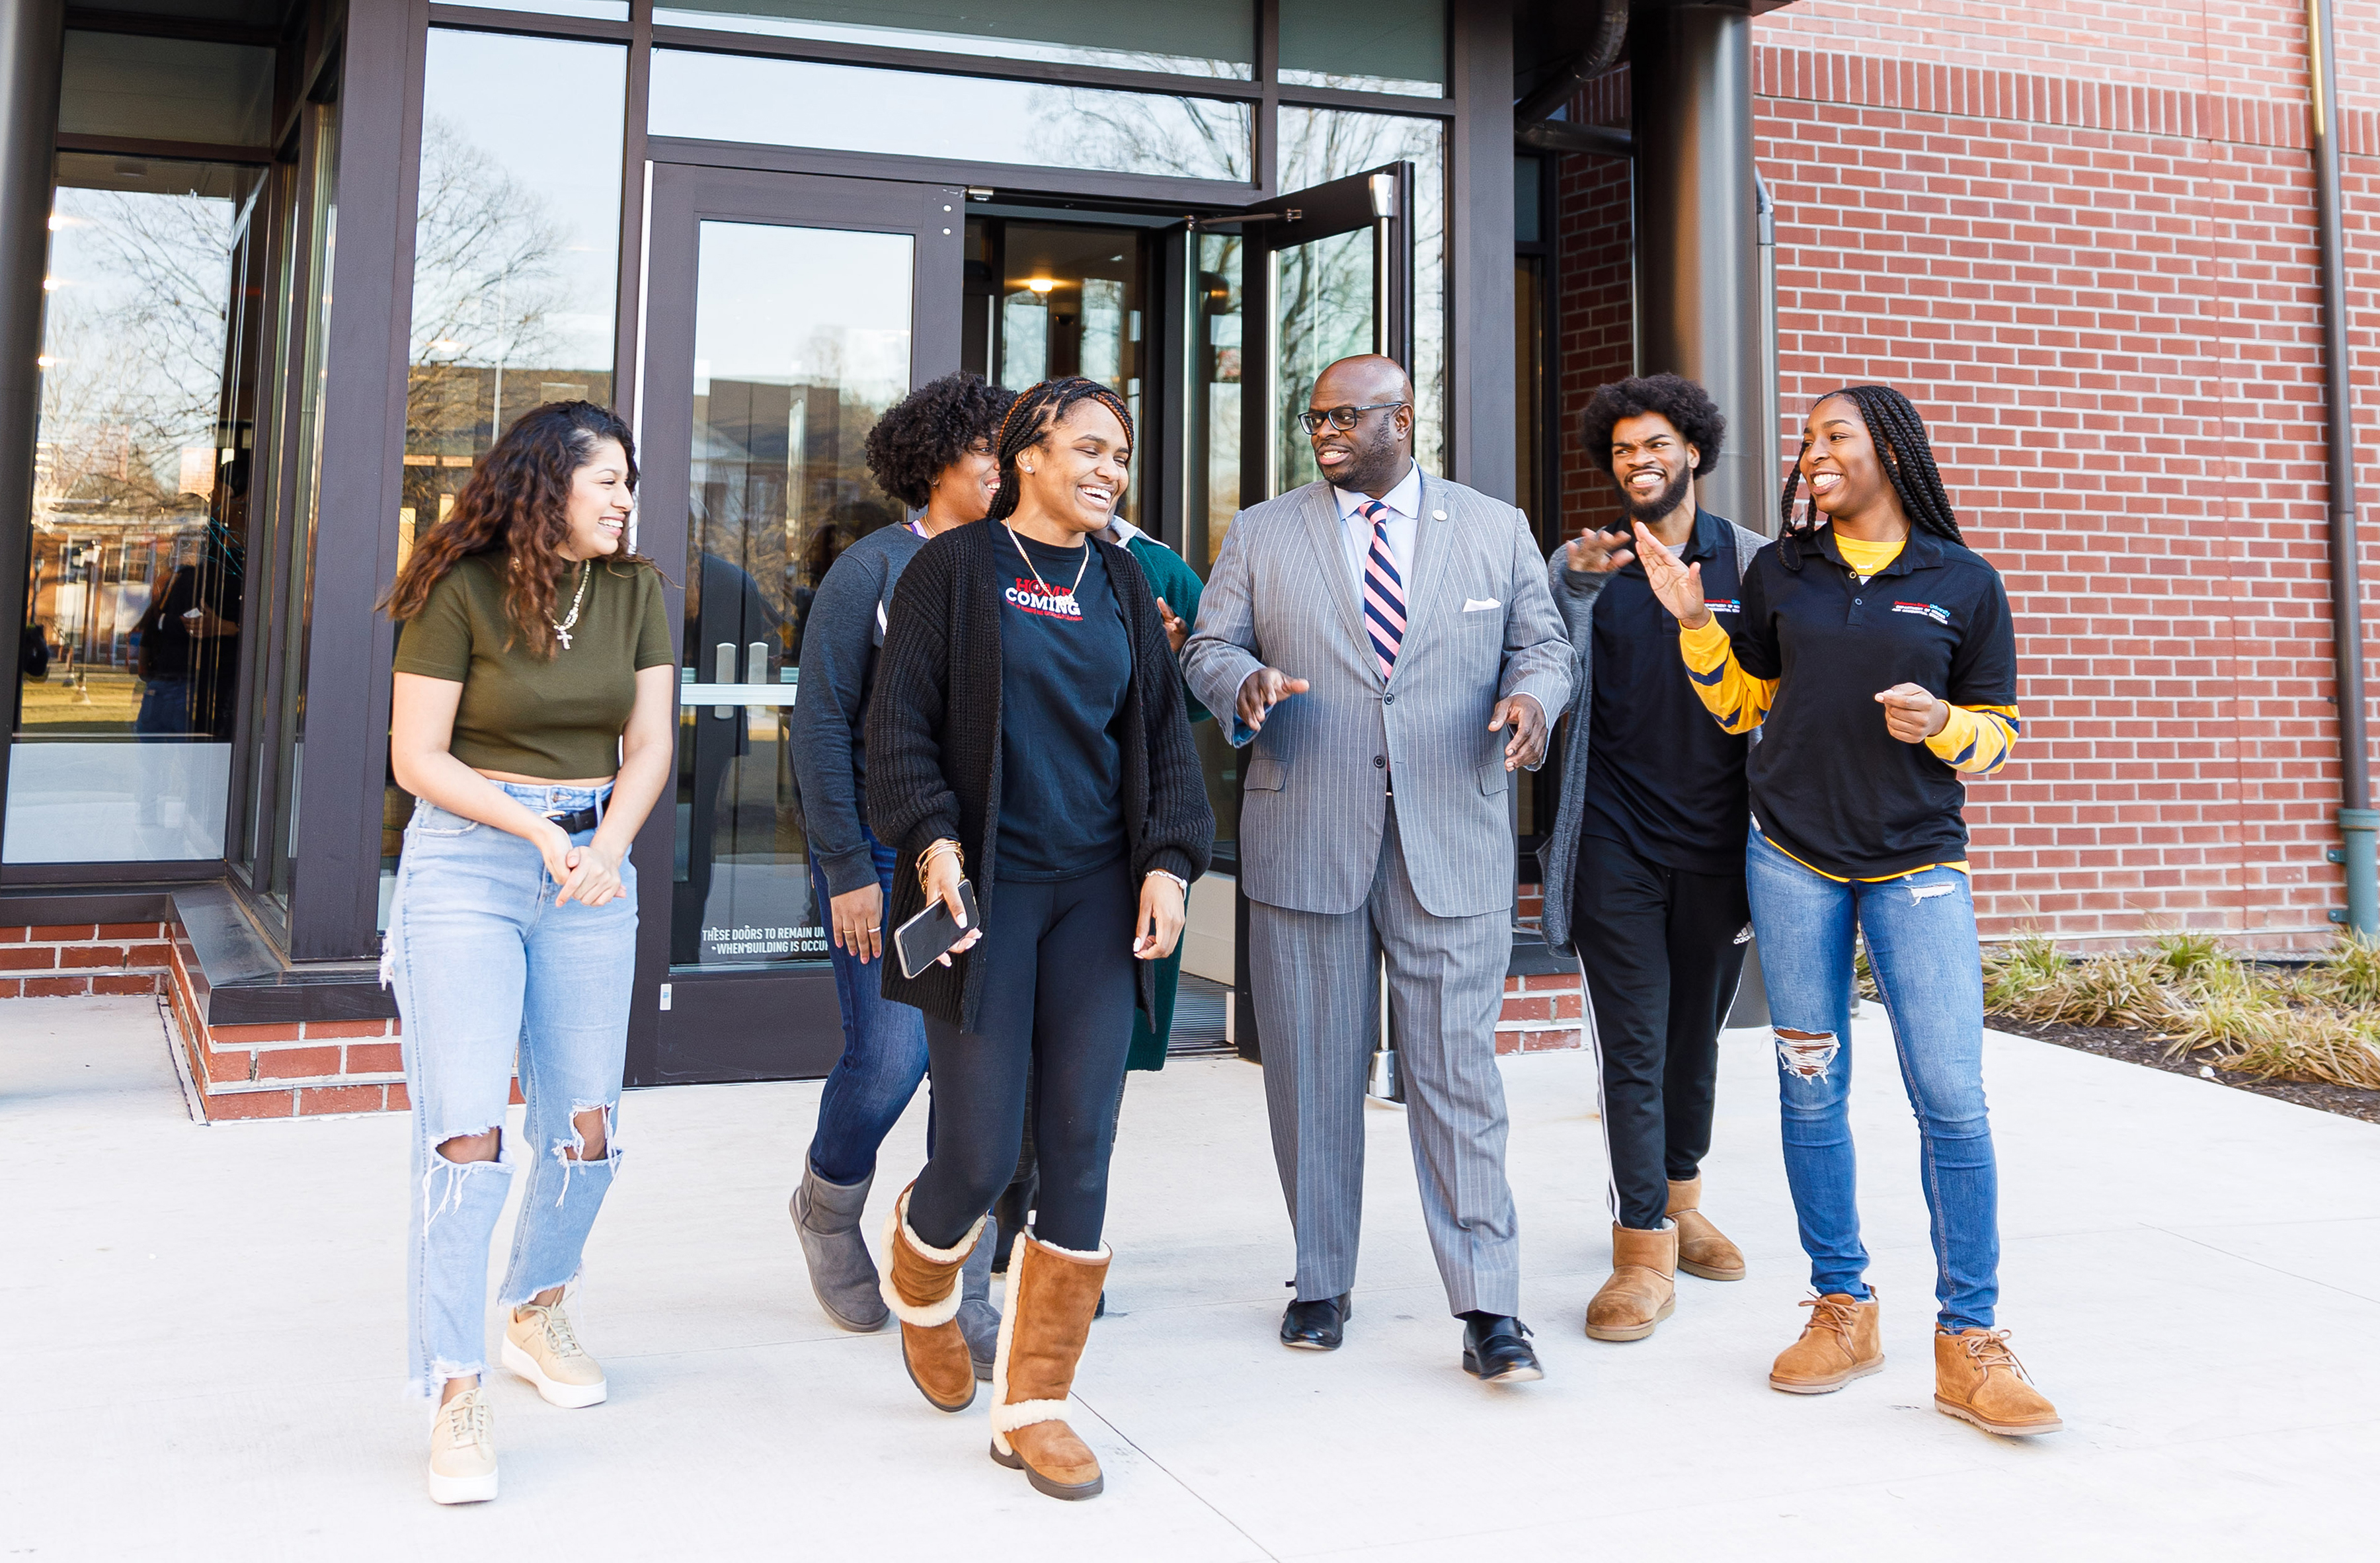 The historic gift will in part provide additional investment in the University endowment, as well as support the Del State Global Institute for Equity, Inclusion, and Civil Rights and the ongoing acquisition of Wesley College. University President Tony Allen is pictured with a group of Del State students -- who are representative of those that will benefit from scholarships from the increased endowment.